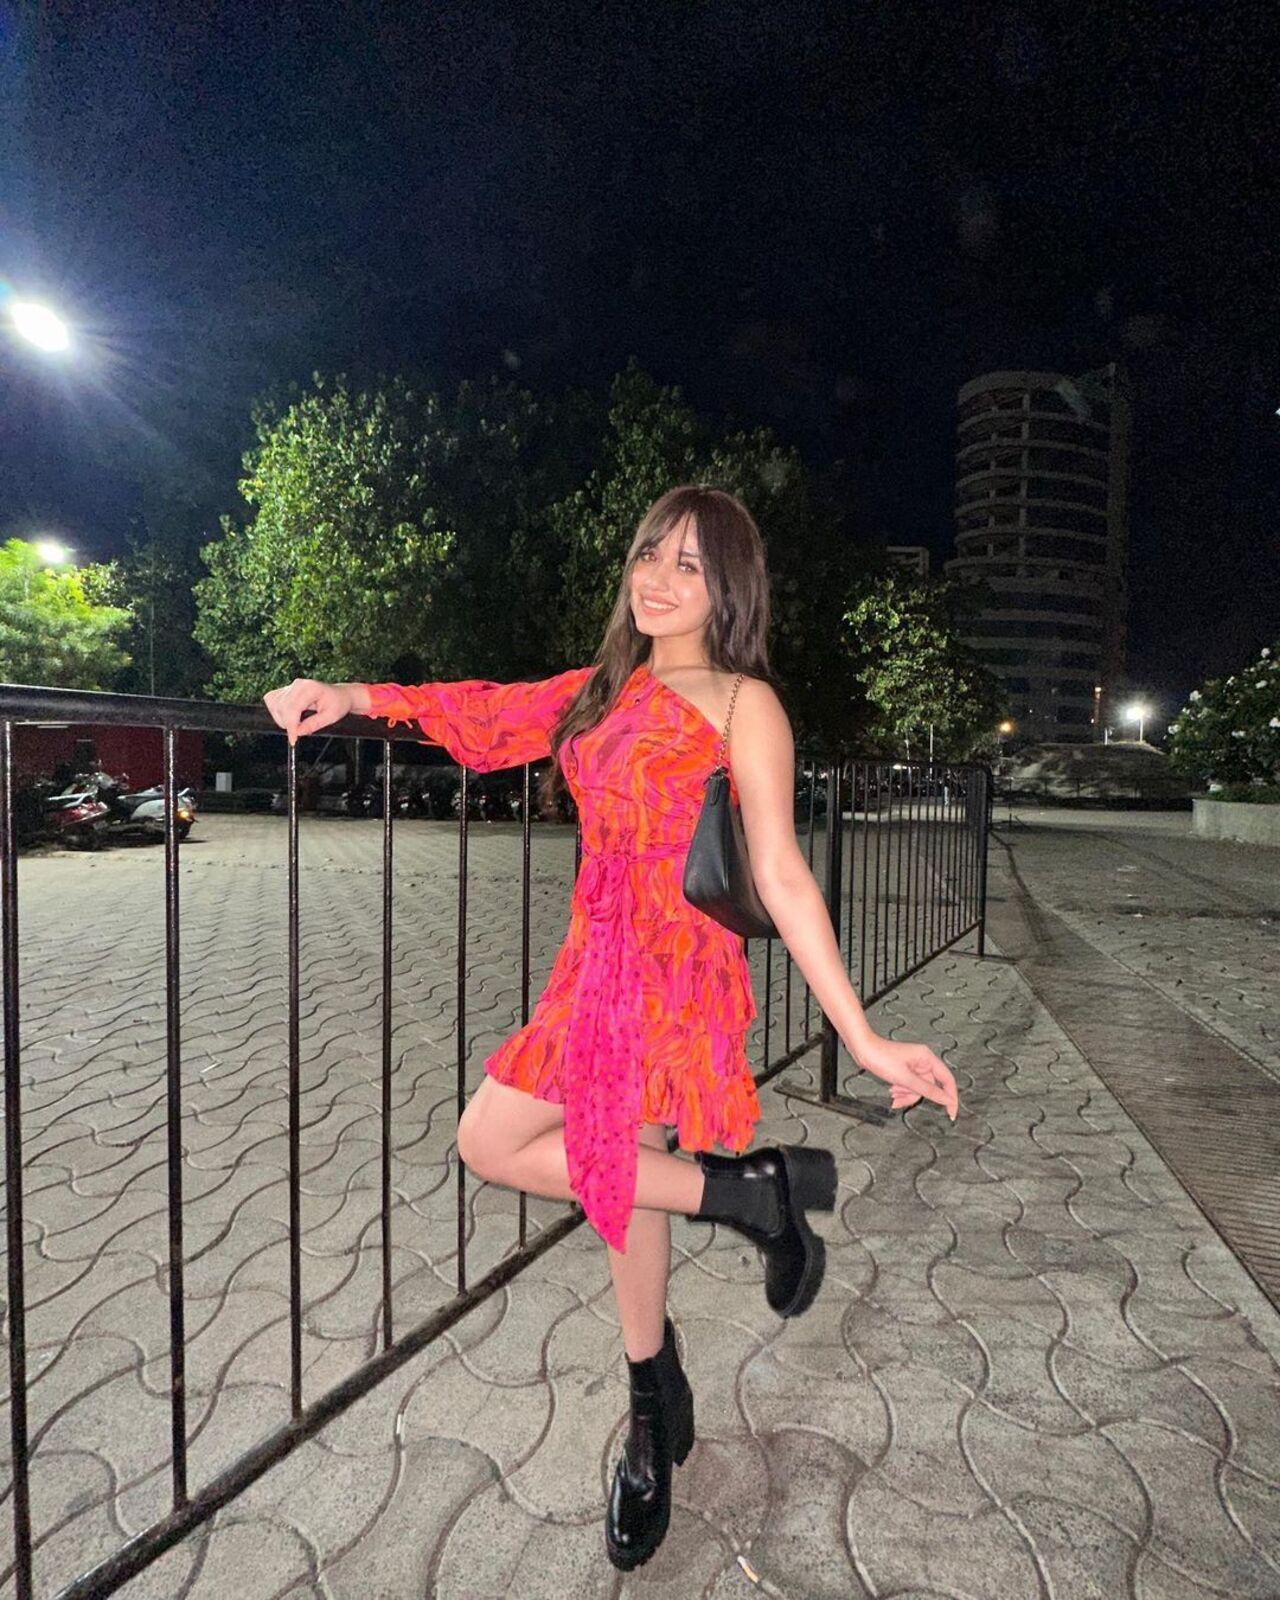 In the heart of the bustling city, amidst the twinkling lights, Jannat Zubair stepped out for a night to remember. Adorned in a pretty pink dress that seemed to have been plucked straight from a fairytale